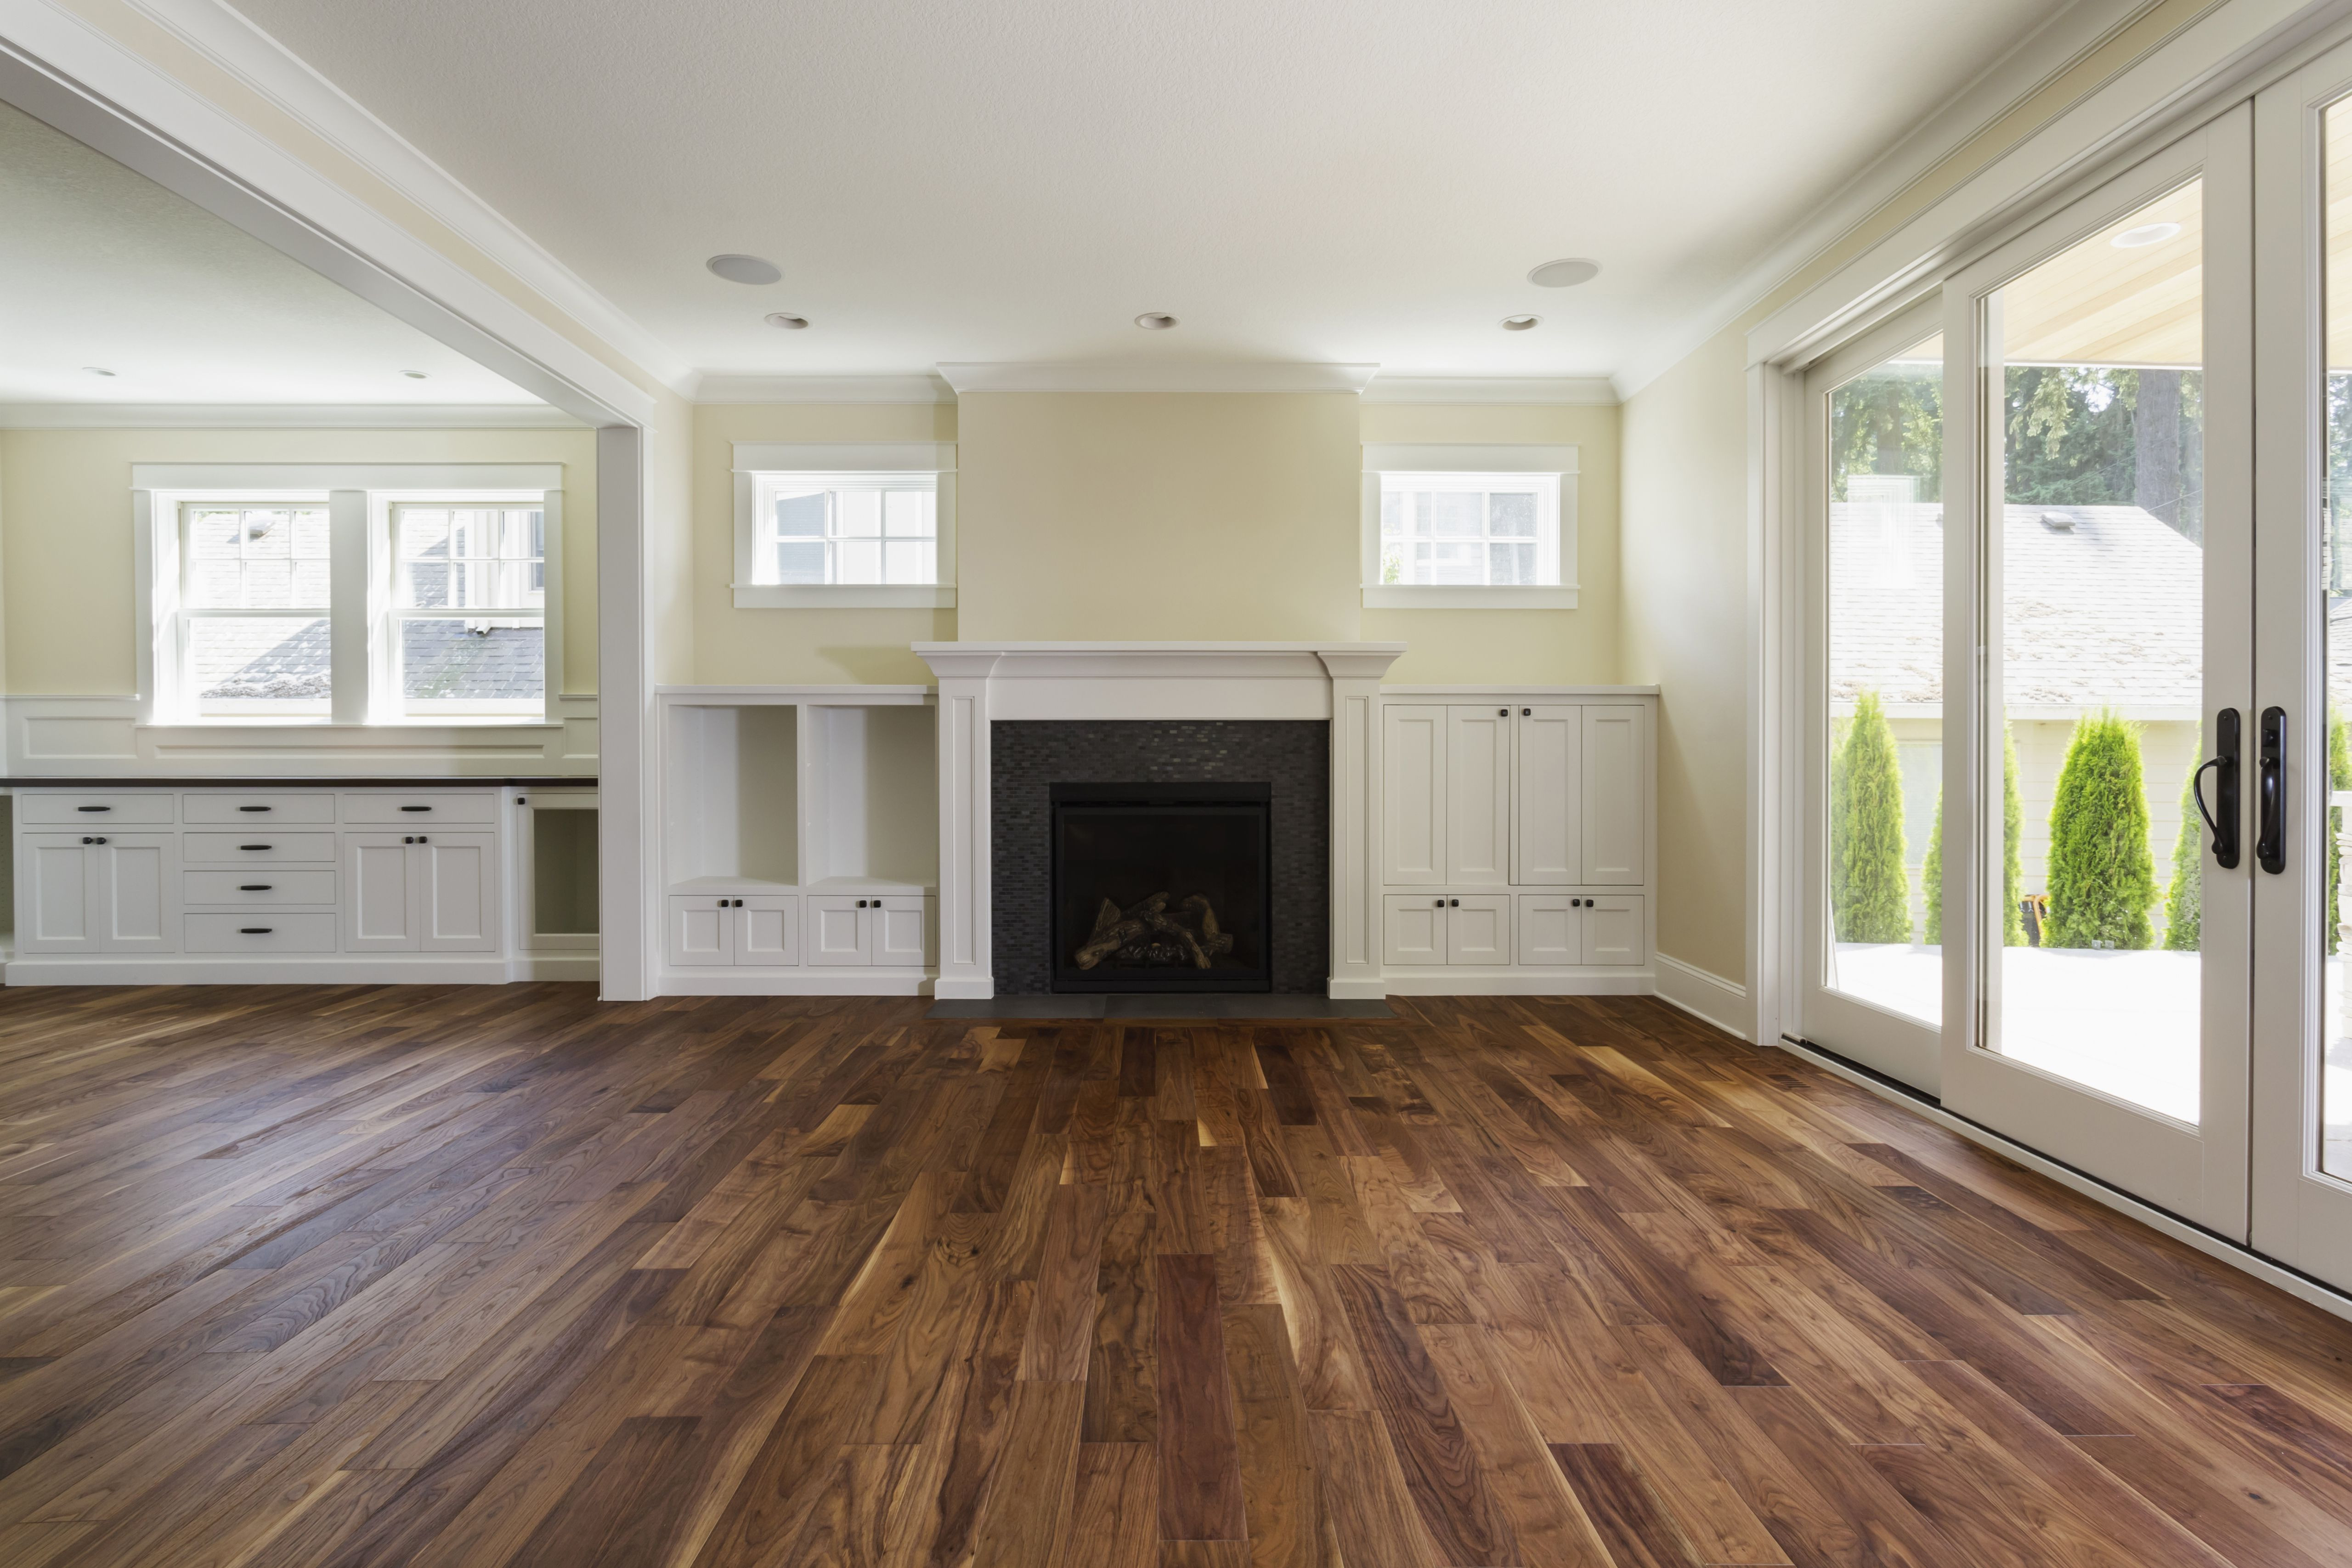 21 Fabulous Average Price to Install Hardwood Floors 2024 free download average price to install hardwood floors of the pros and cons of prefinished hardwood flooring intended for fireplace and built in shelves in living room 482143011 57bef8e33df78cc16e035397